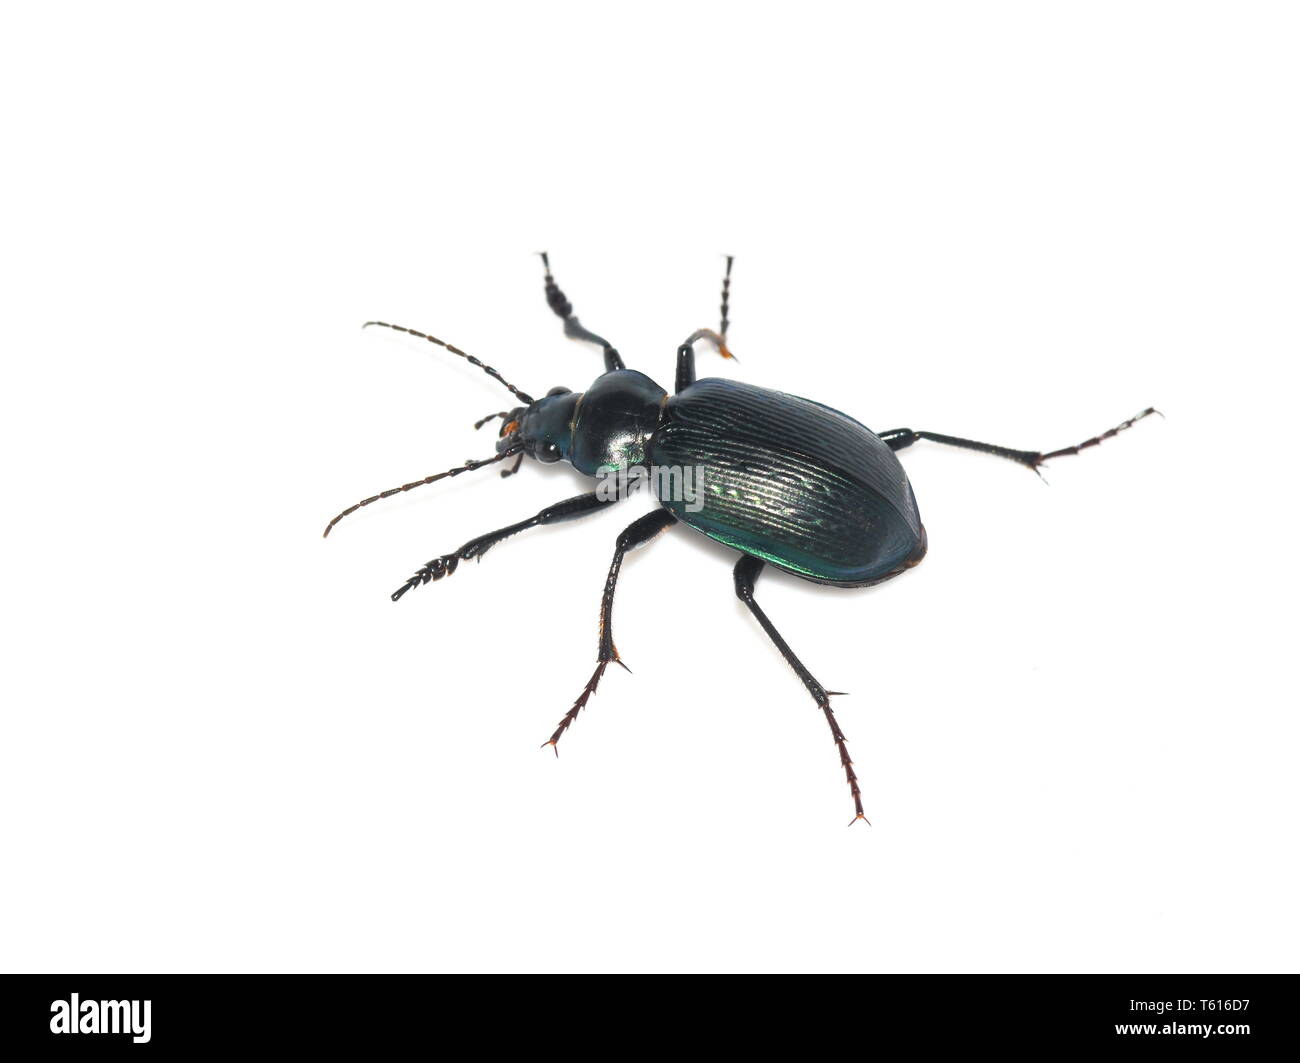 The caterpillar hunter ground beetle Calosoma granatense from Galapagos islands isolated on white background Stock Photo